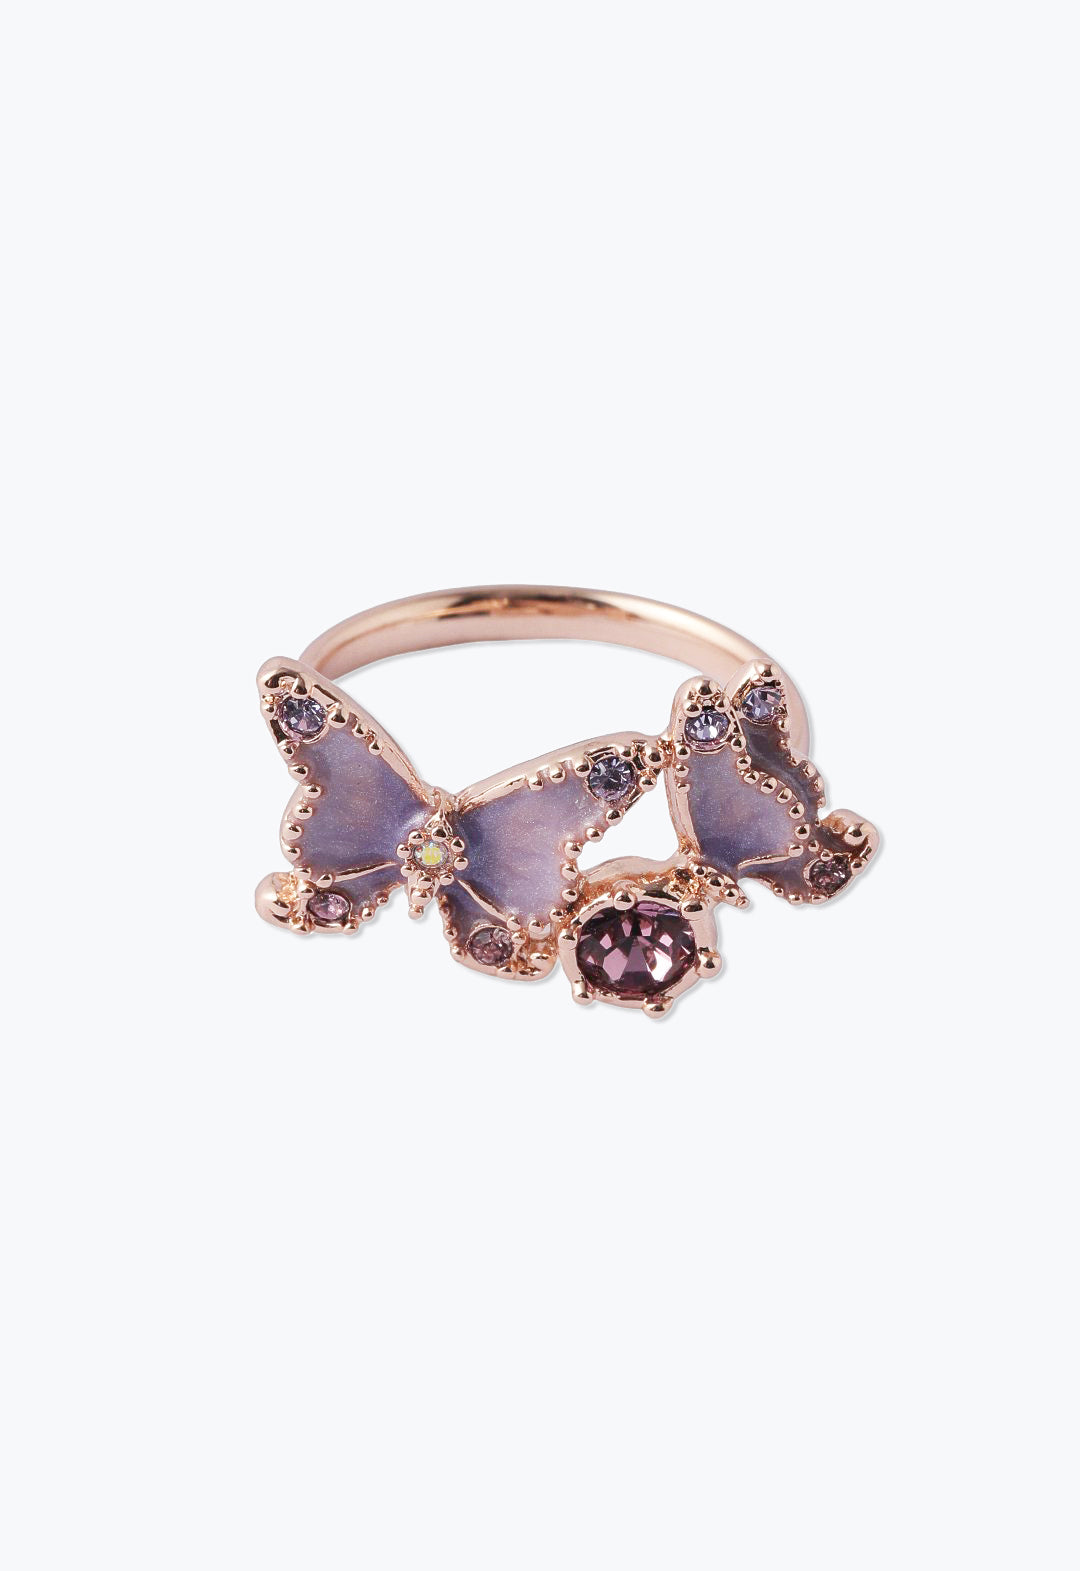 Ring 2-butterflies 1 purple wings open, 1 closed, with gemstones, one on the ring flower like